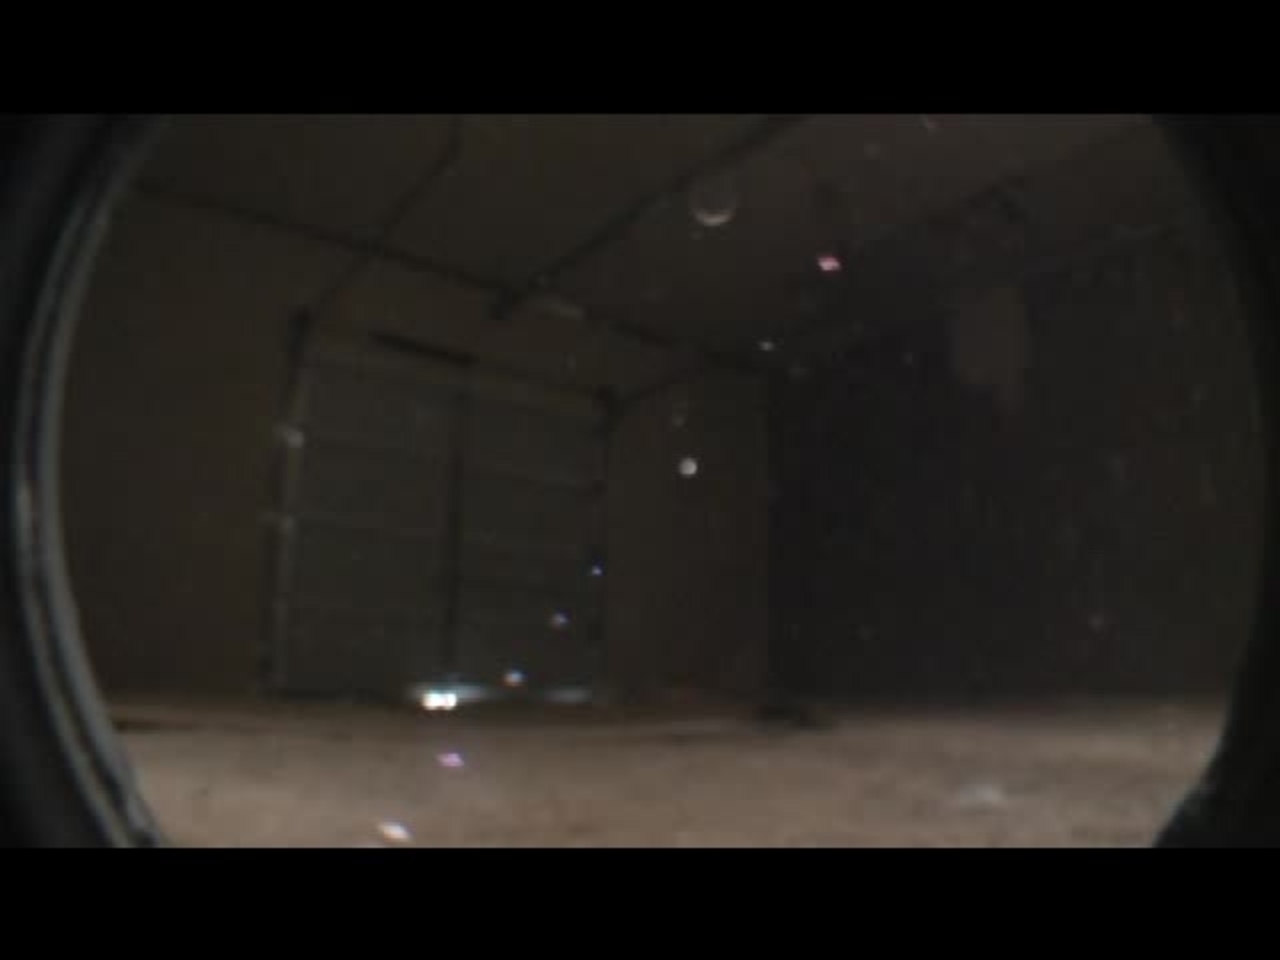 Test 11: Dispersion and Burning Behavior of Hydrogen Released in a Full-Scale Residential Garage in the Presence and Absence of Conventional Automobiles (View of garage interior from floor camera)